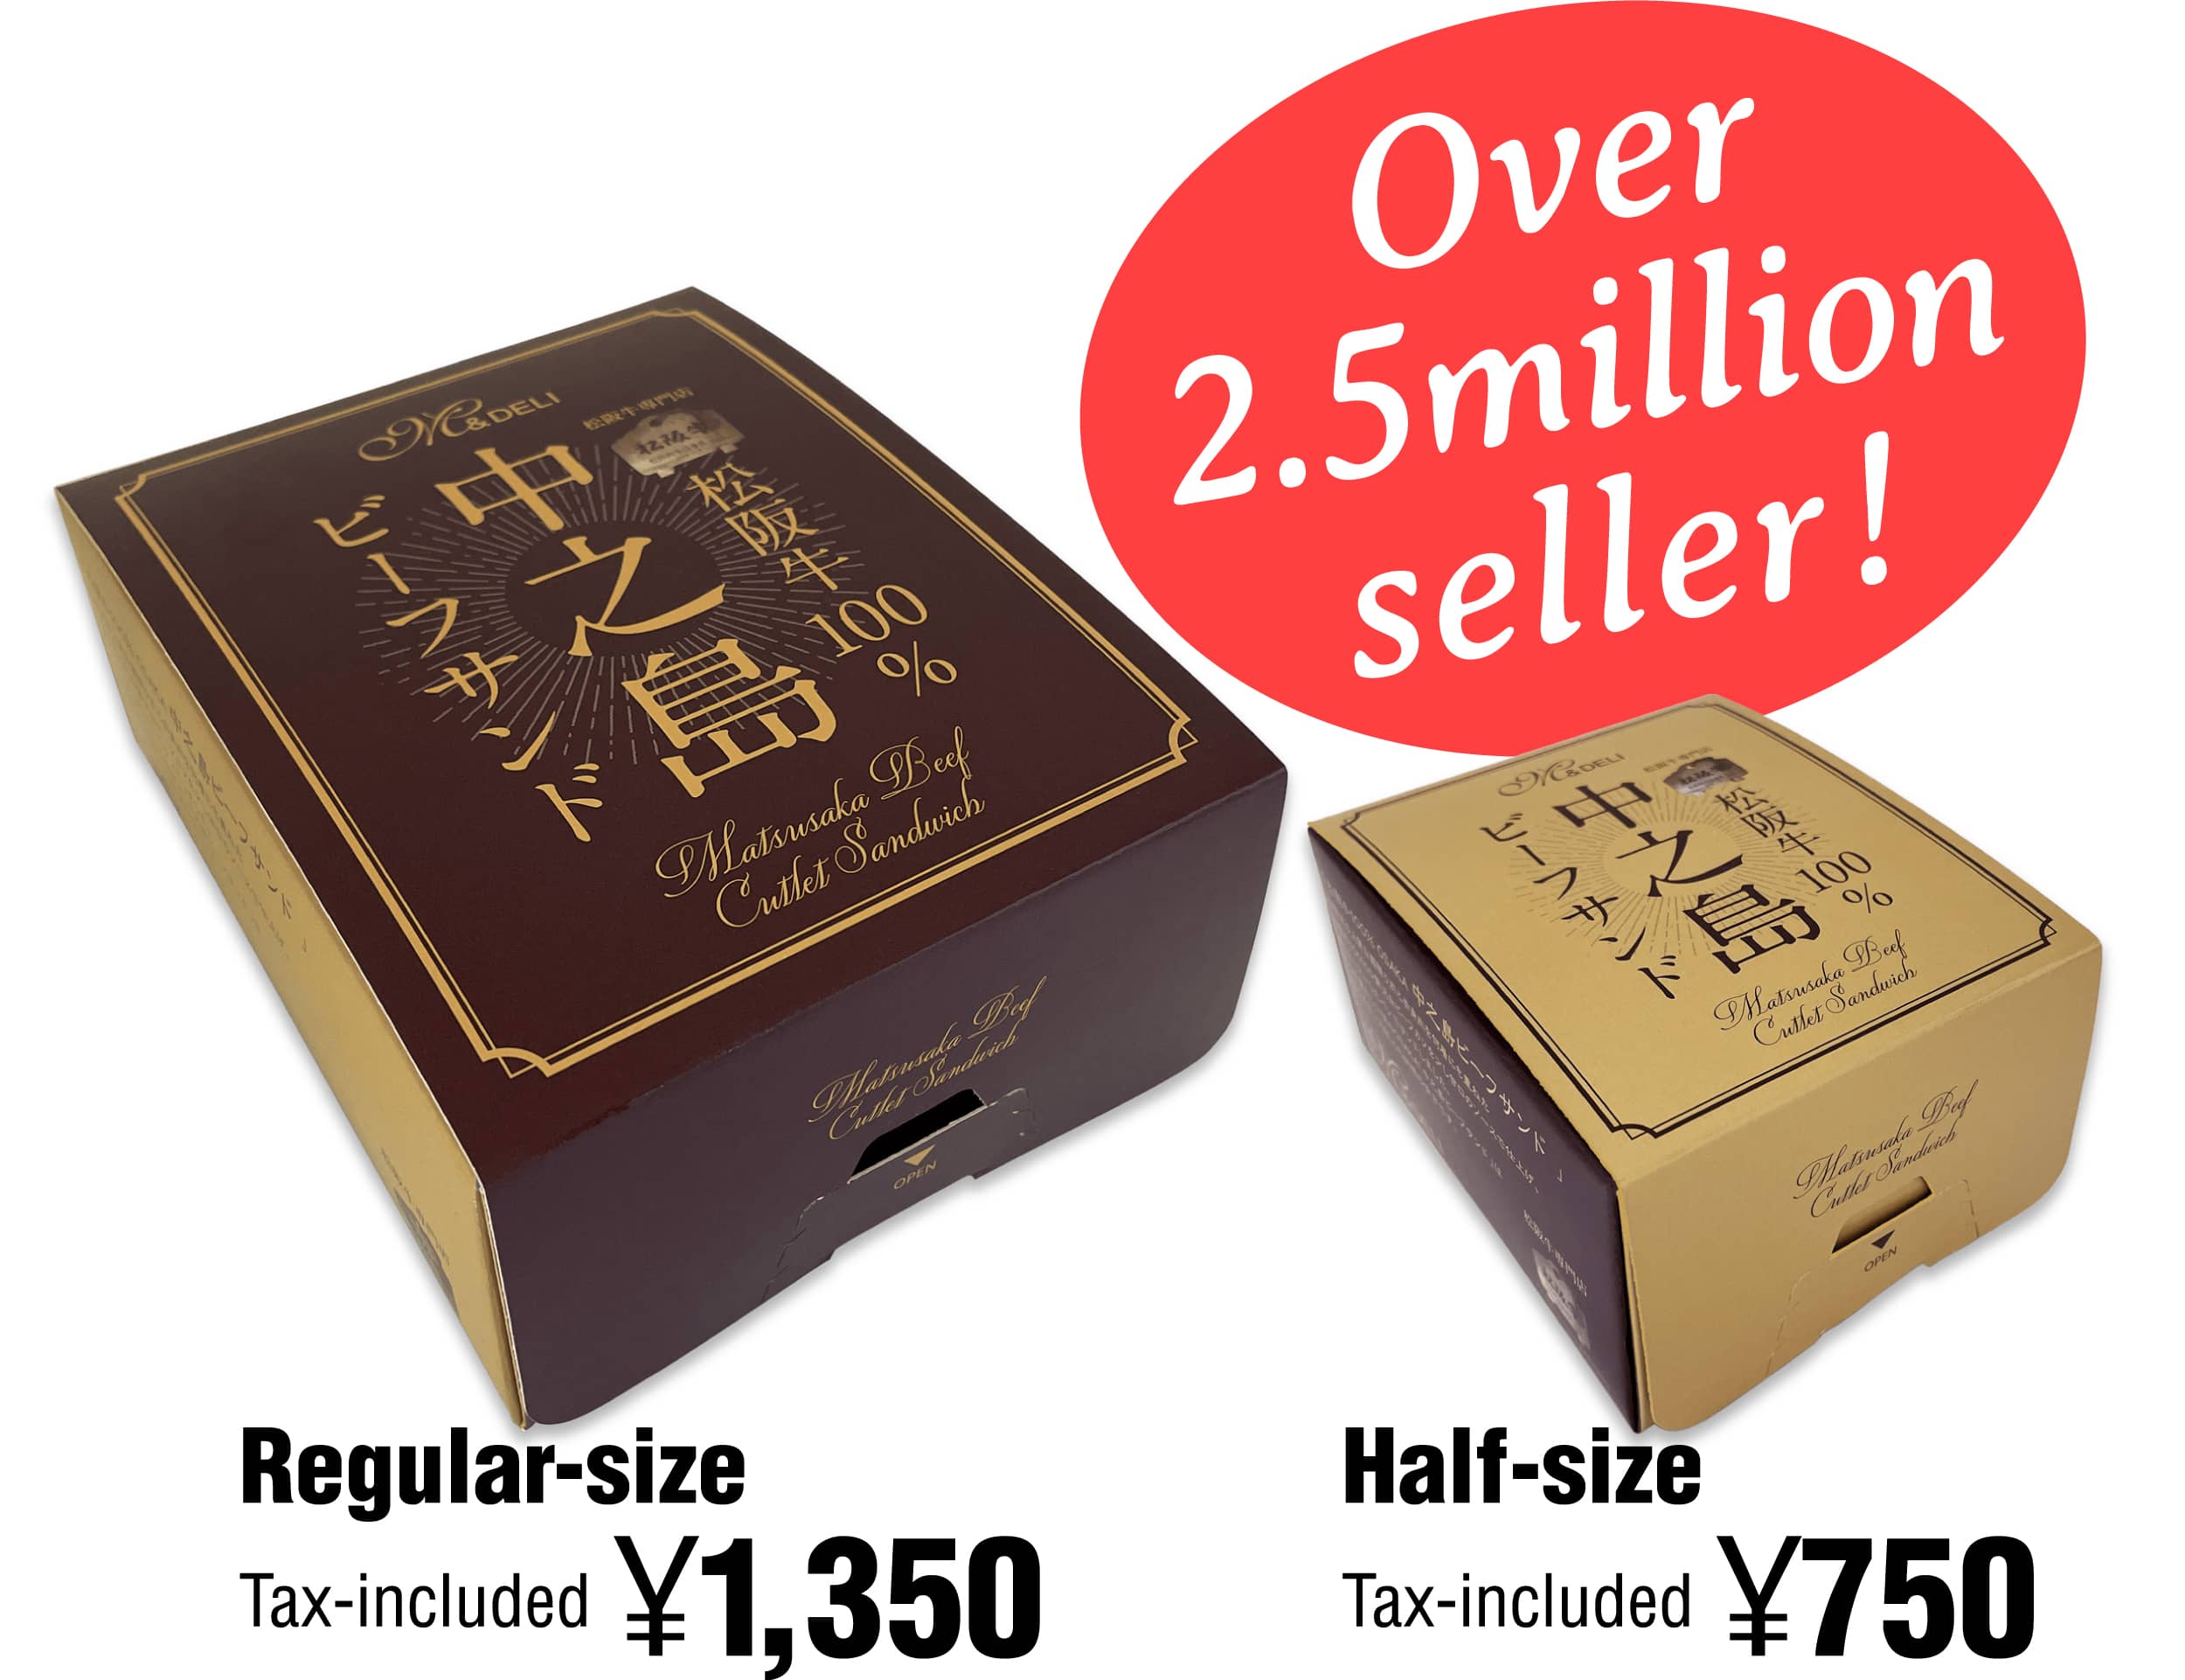 Regular-size Tax-included ¥1,290 half-size Tax-included ¥720 Over 2.5million seller!